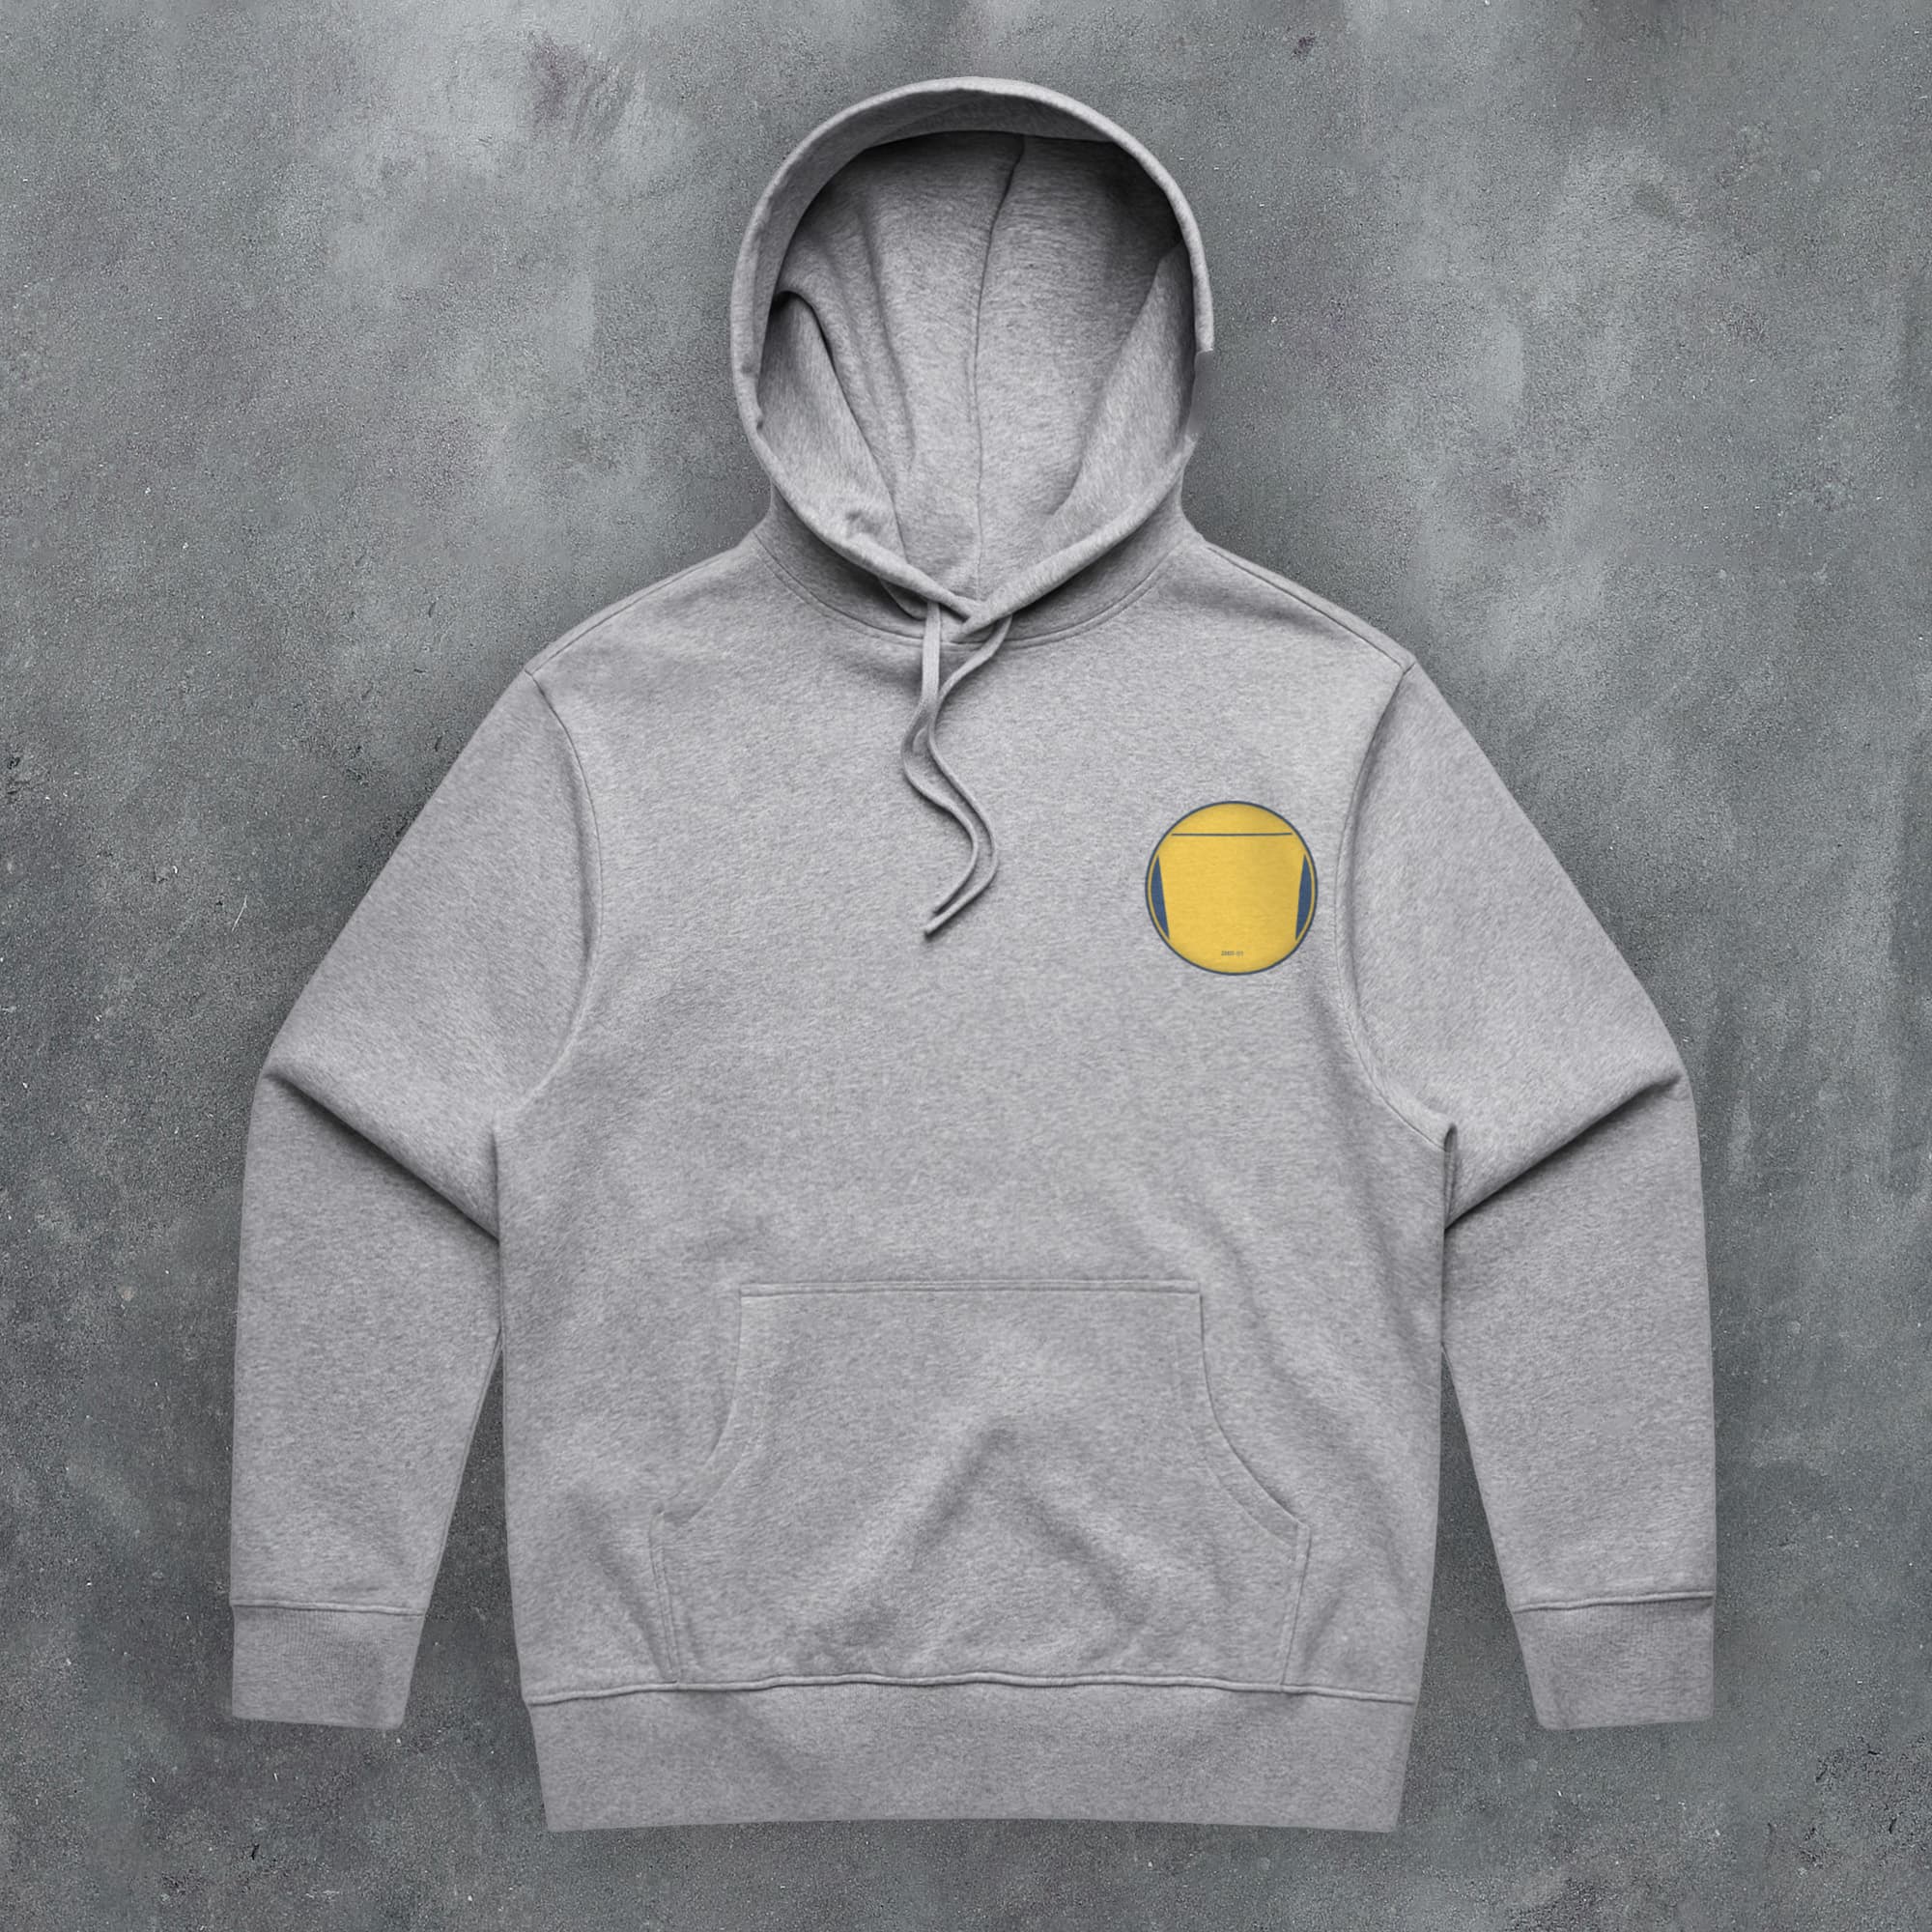 a grey hoodie with a yellow smiley face on it